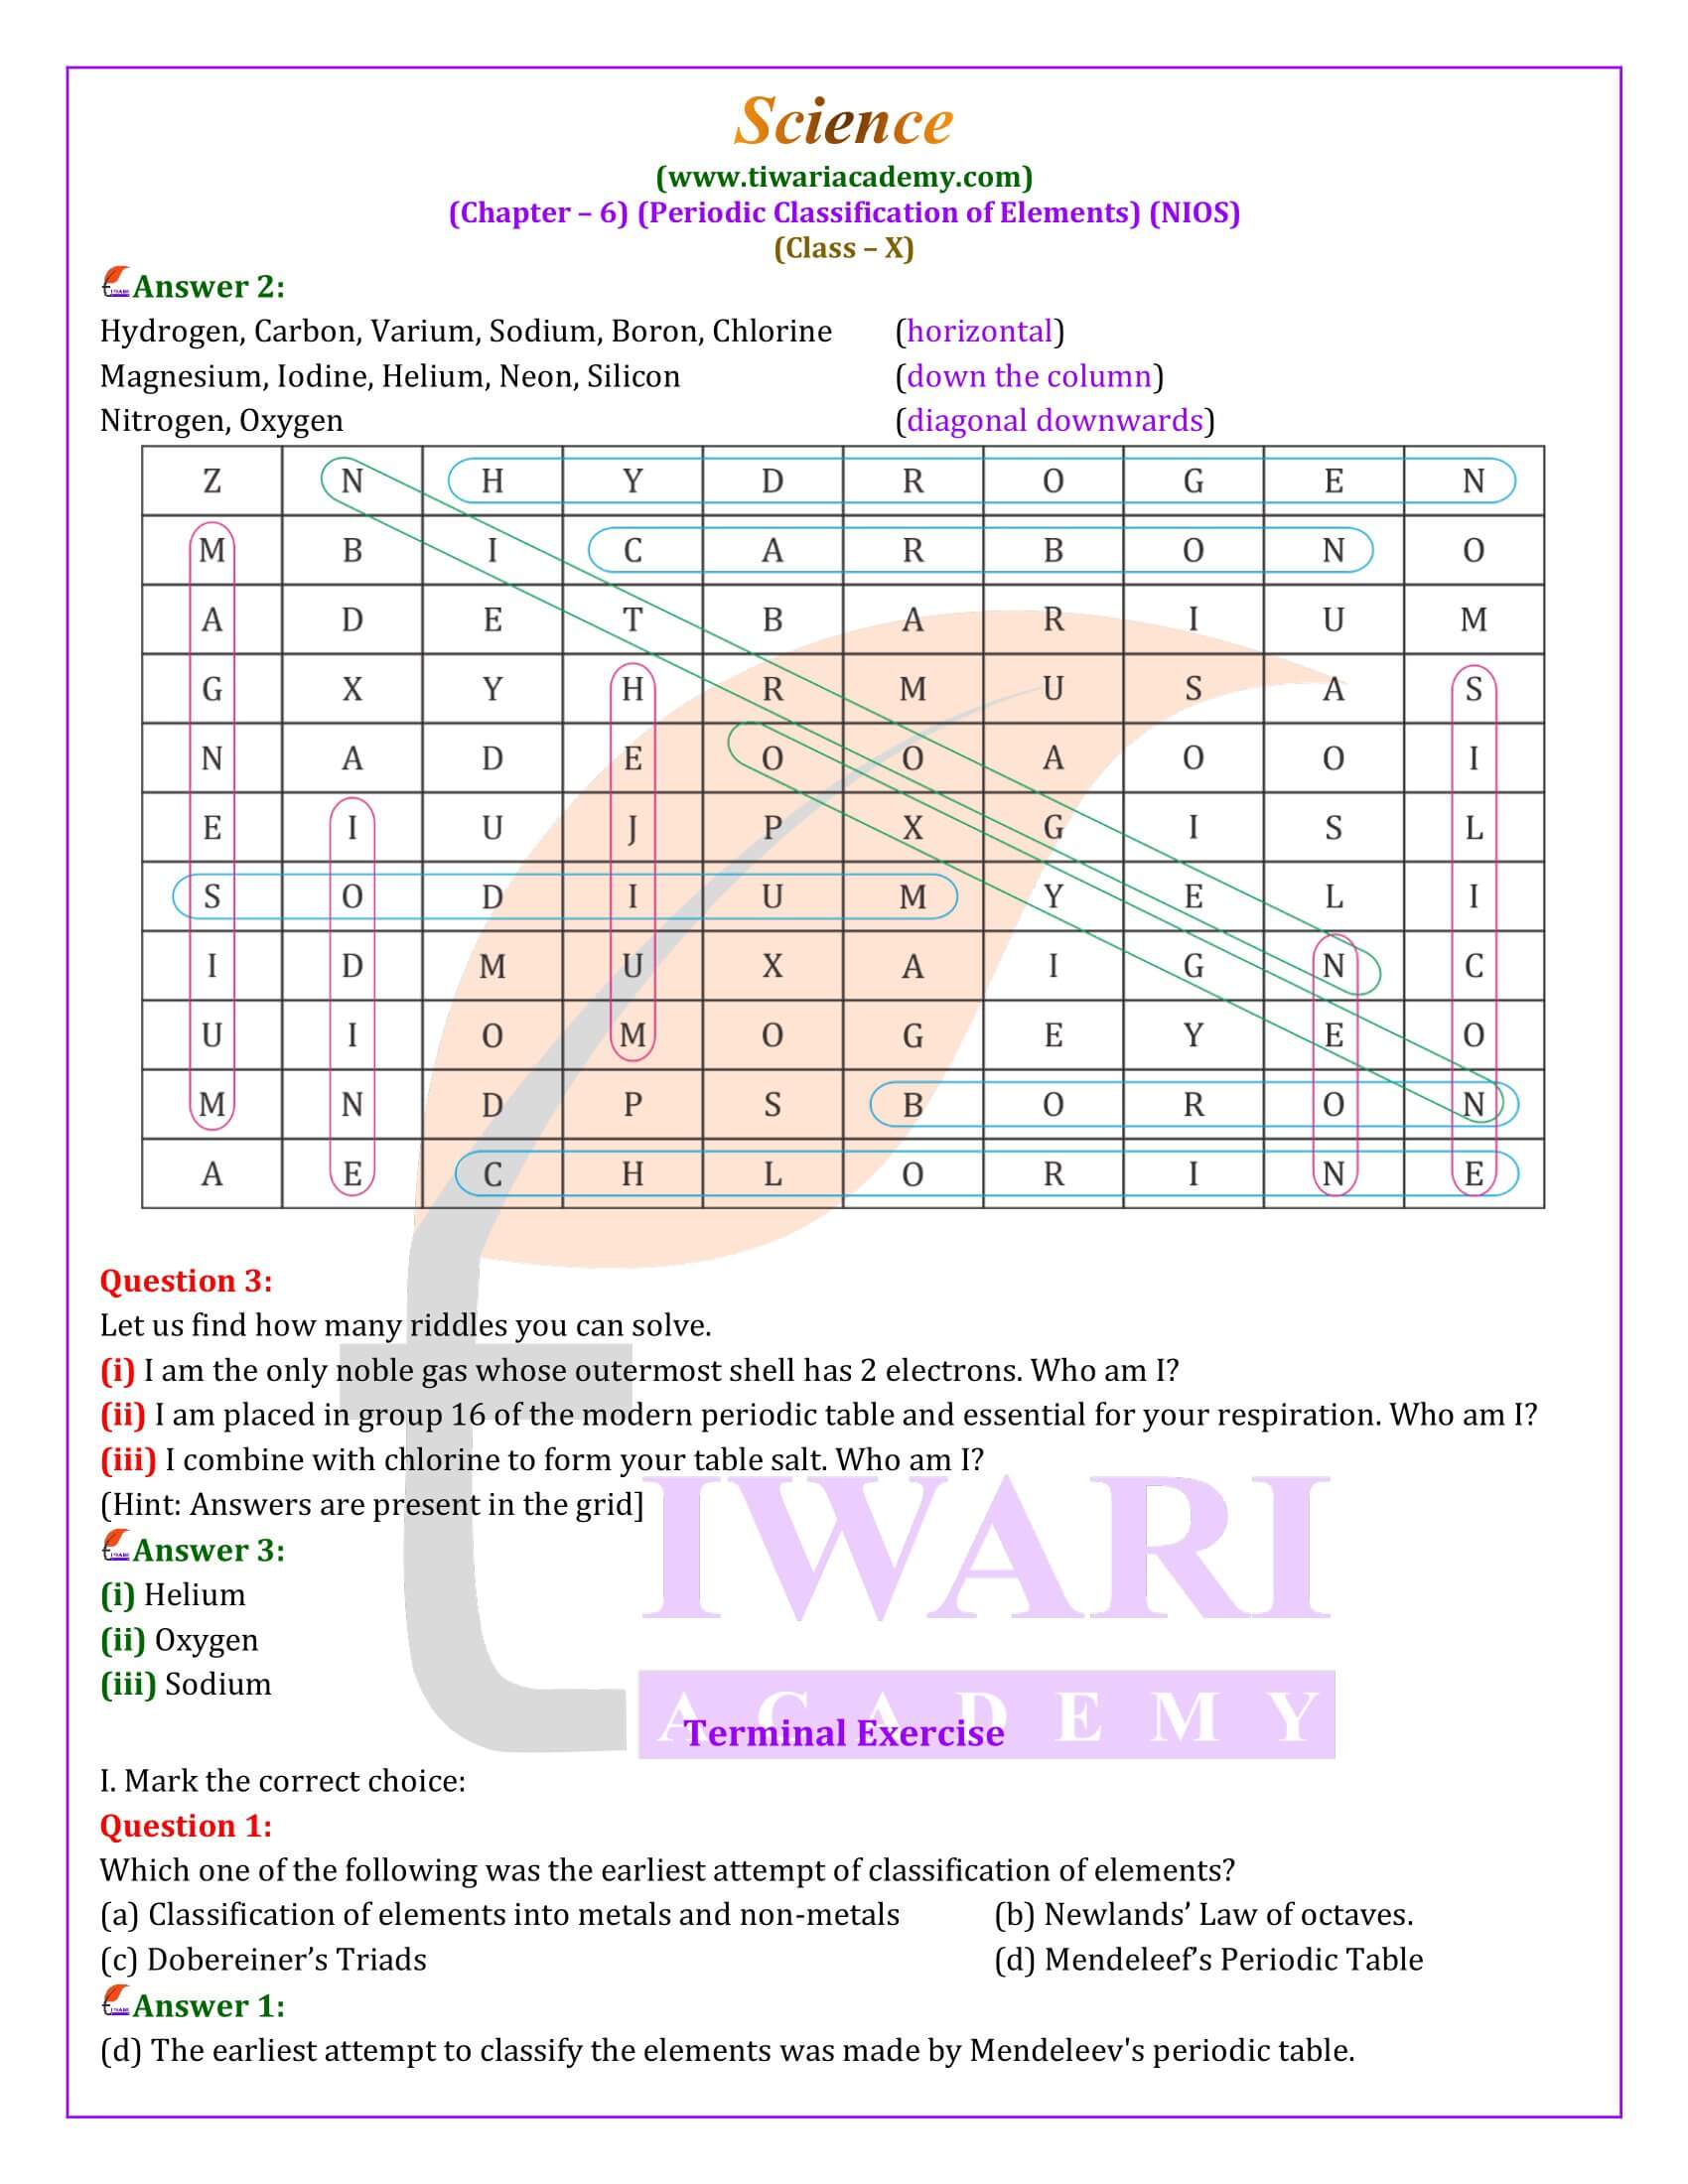 NIOS Class 10 Science Chapter 6 Periodic Classification of Elements guide